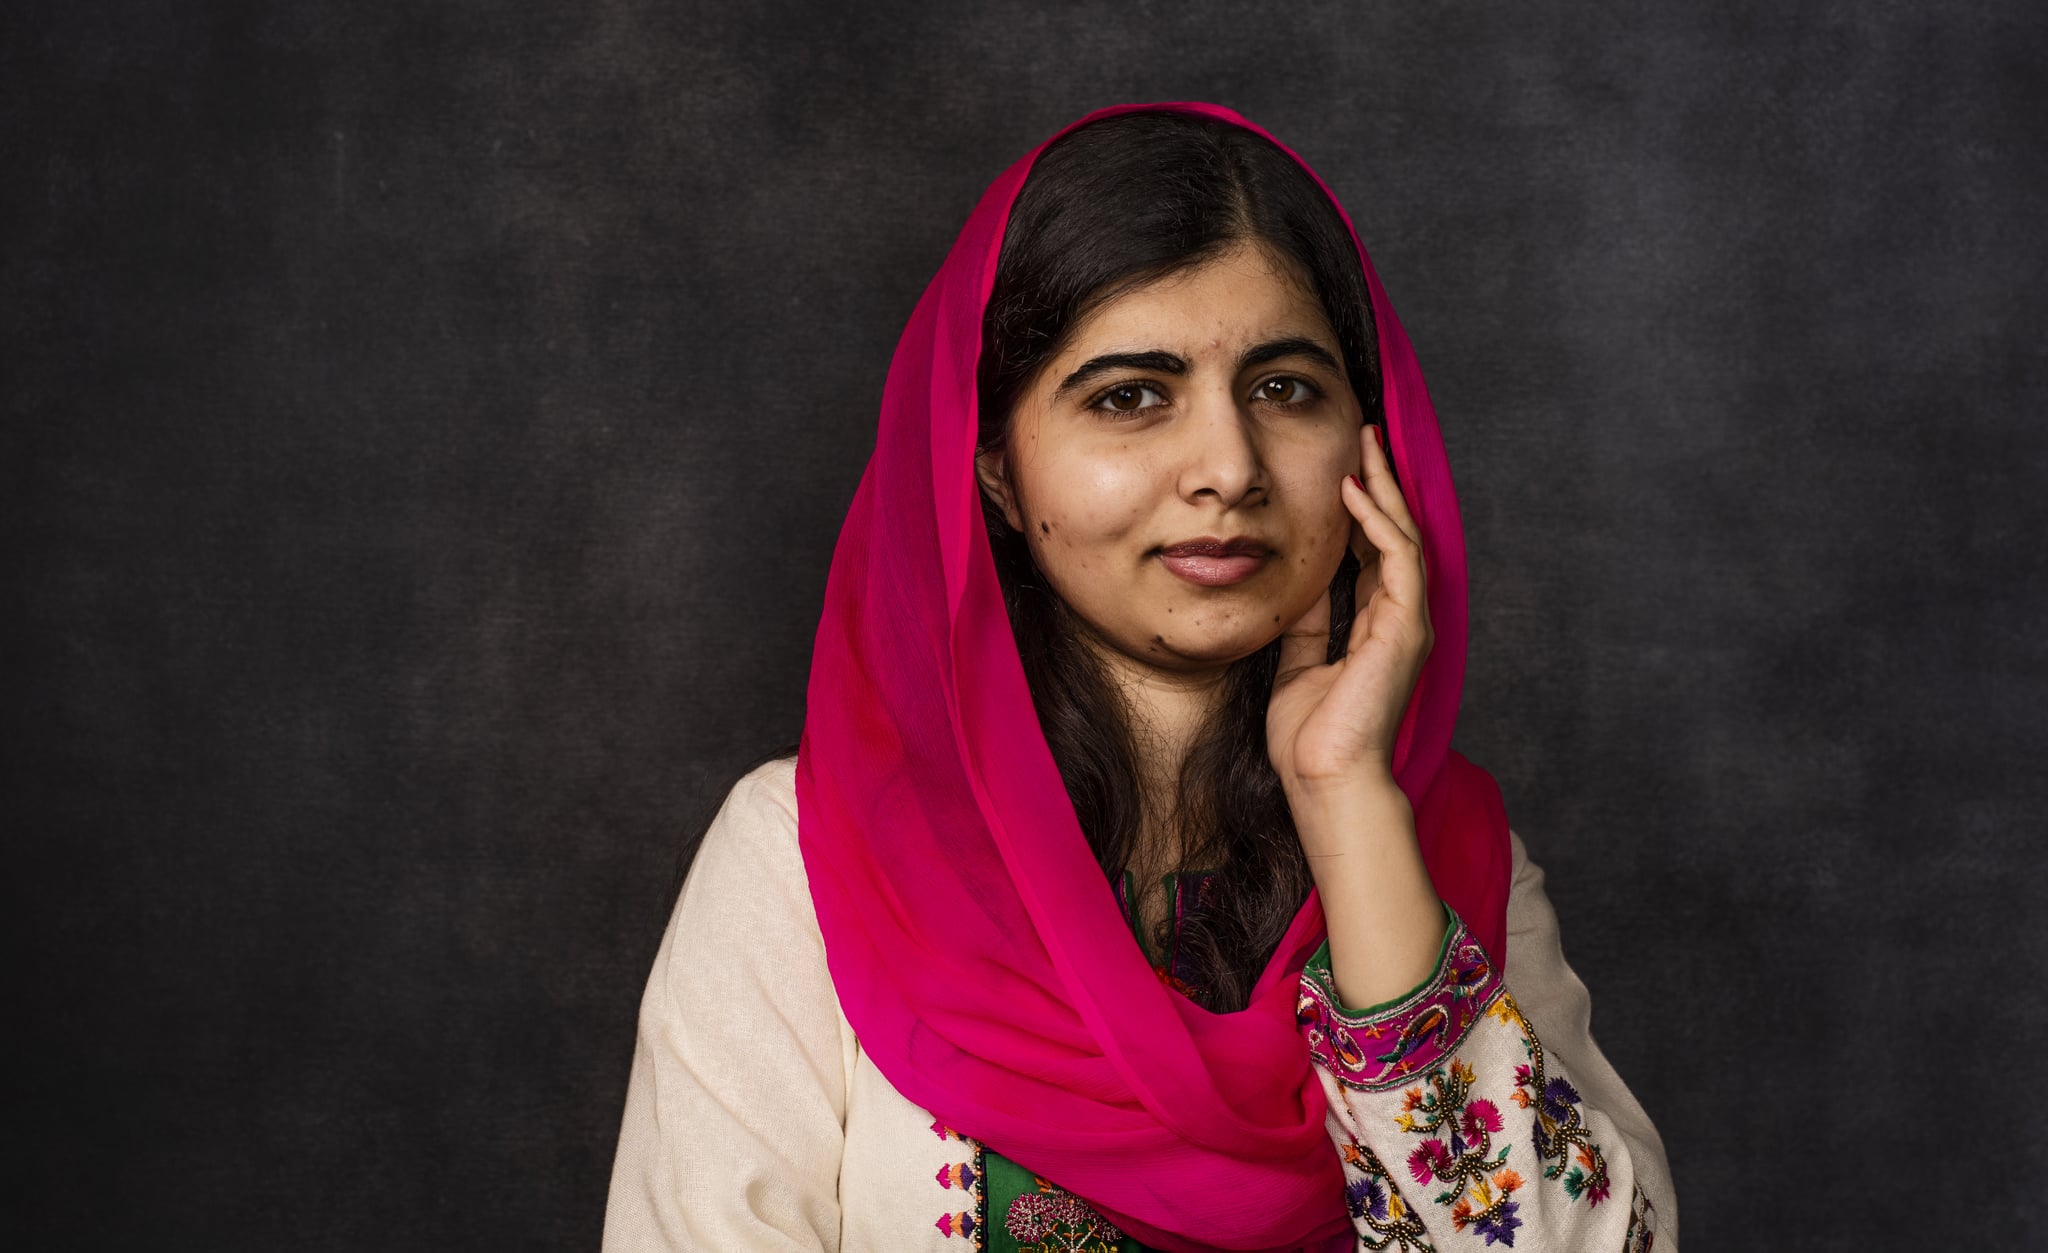 (AUSTRALIA OUT) Malala Yousafzai is a Pakistani activist for women's education and the youngest Nobel laureate.  She's in Sydney for a speech engagement on December 13, 2018. (Photo by Louise Kennerley / Fairfax Media via Getty Images via Getty Images)